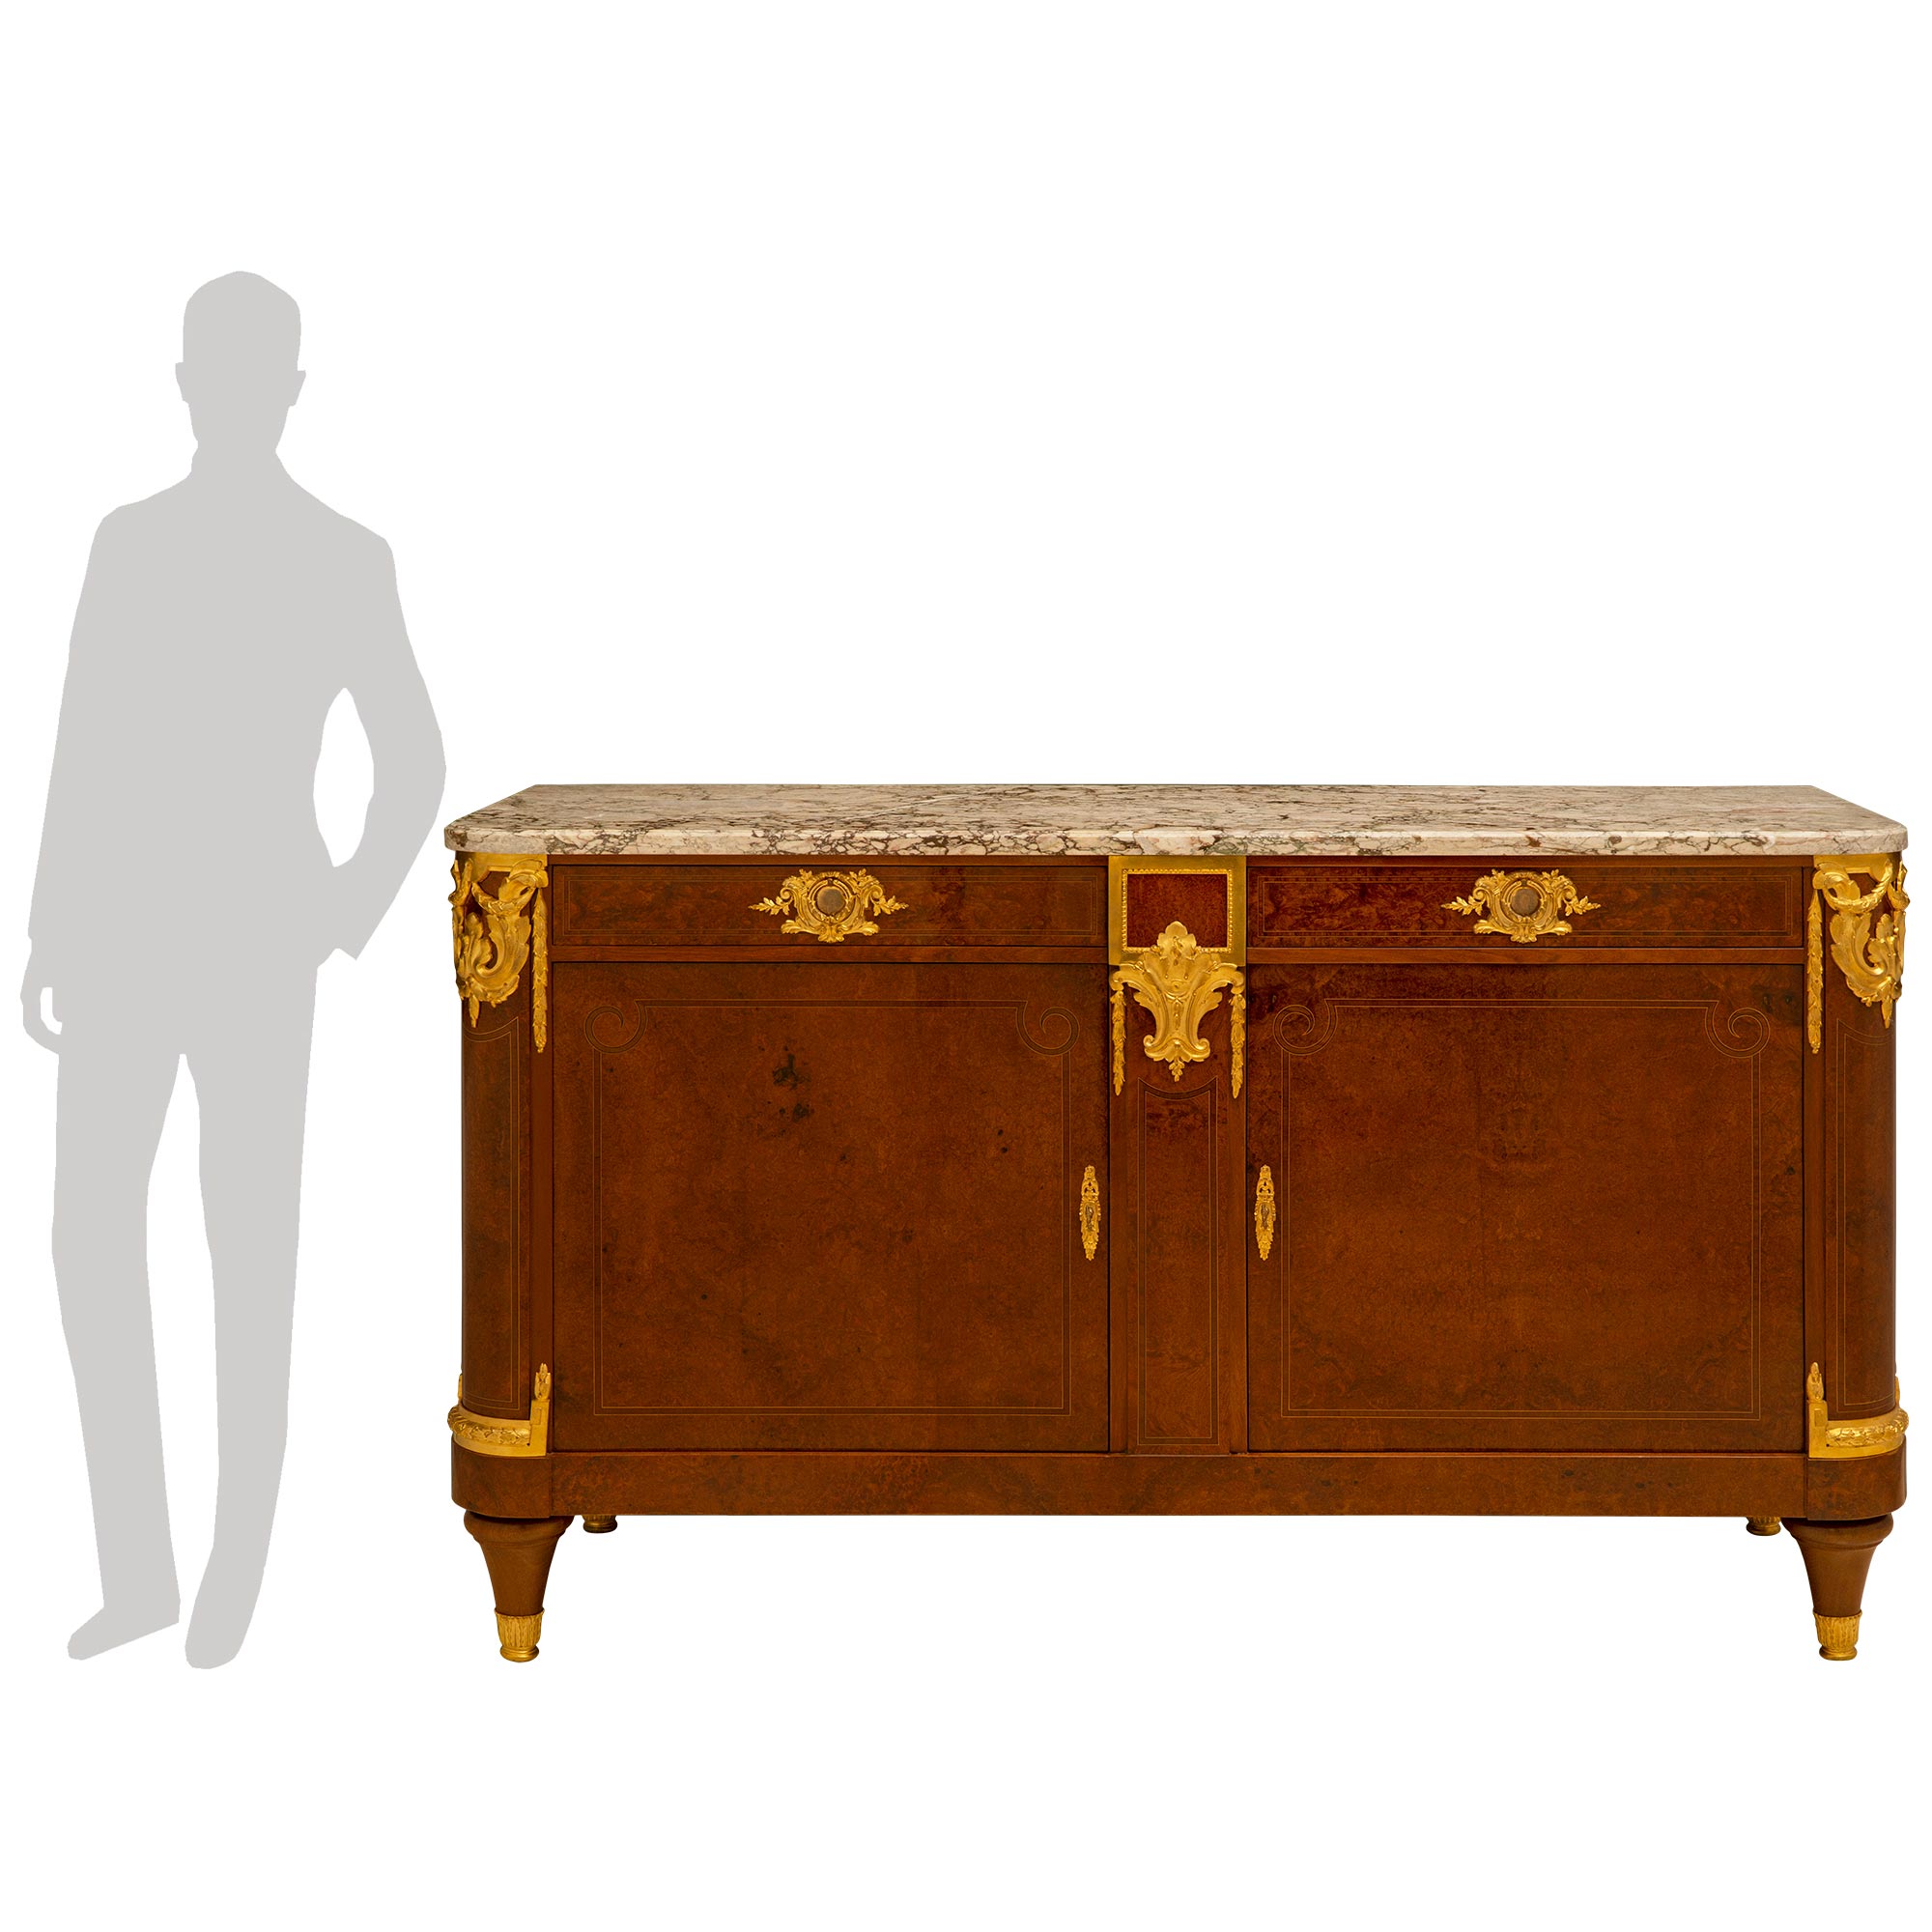 French 19th Century Empire Neoclassical Style Burl Walnut and Ormolu Buffet For Sale